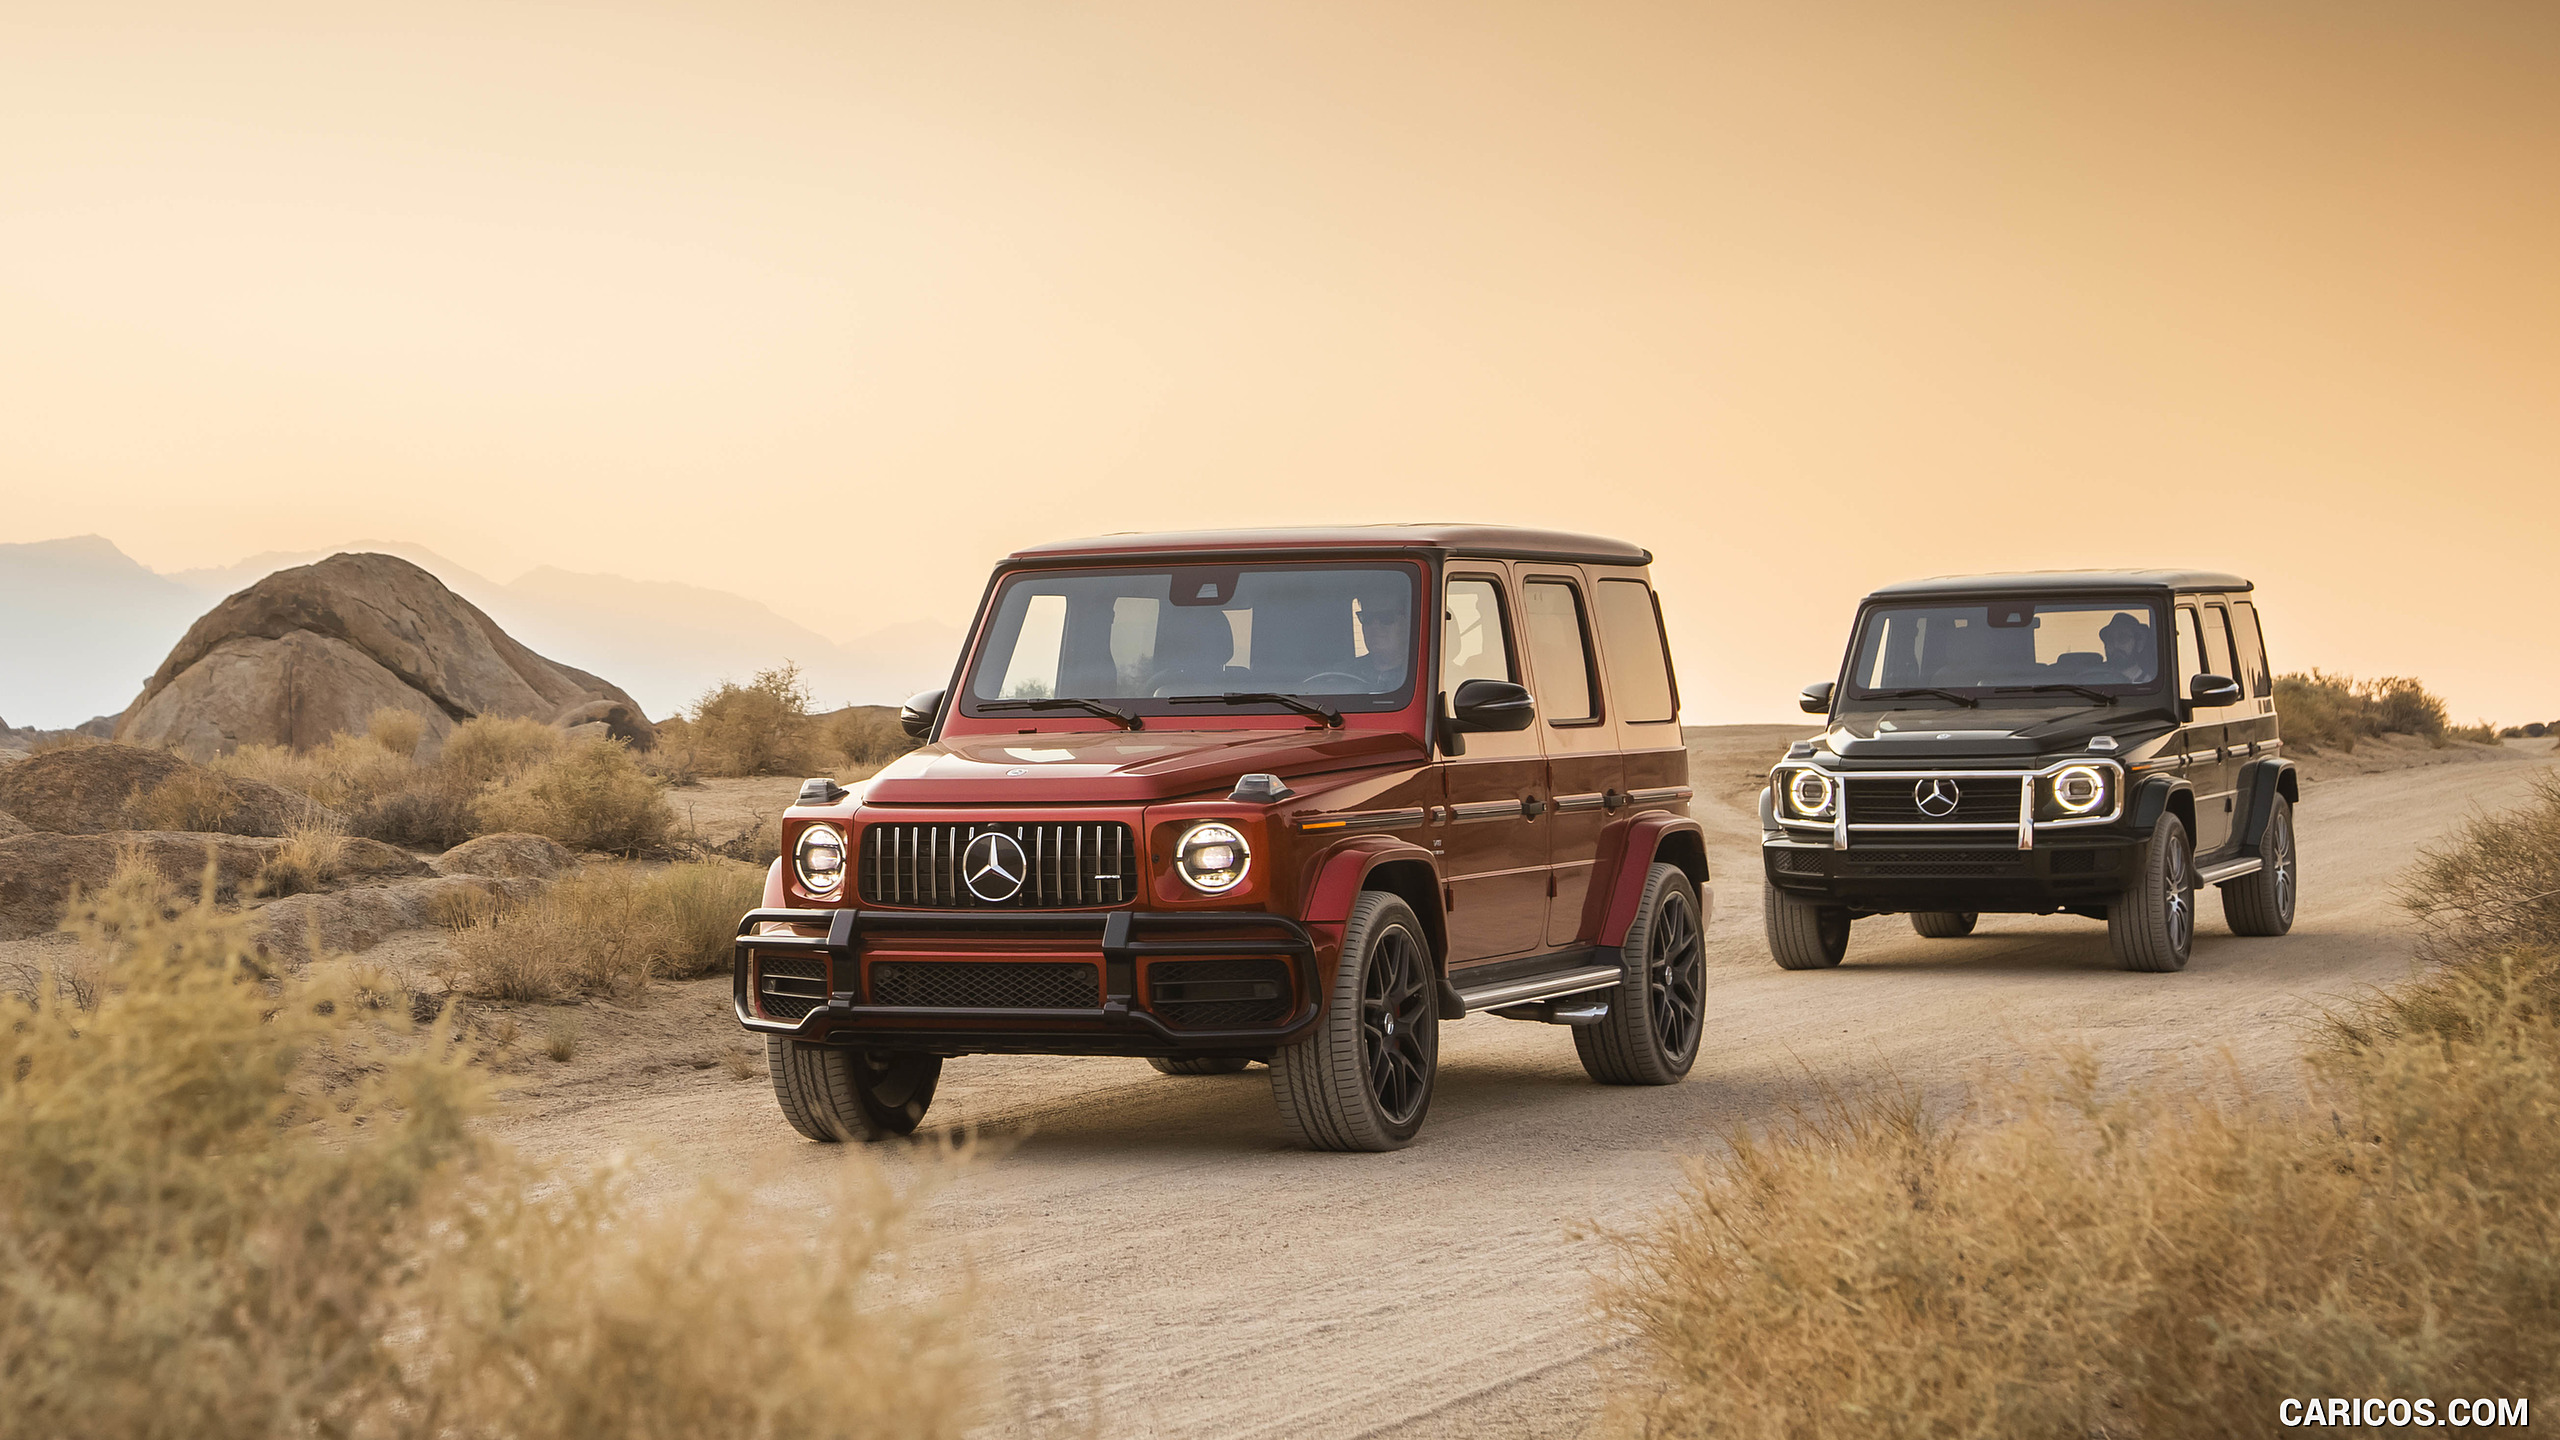 2019 Mercedes-AMG G63 (U.S.-Spec) and 2019 G550, #336 of 452